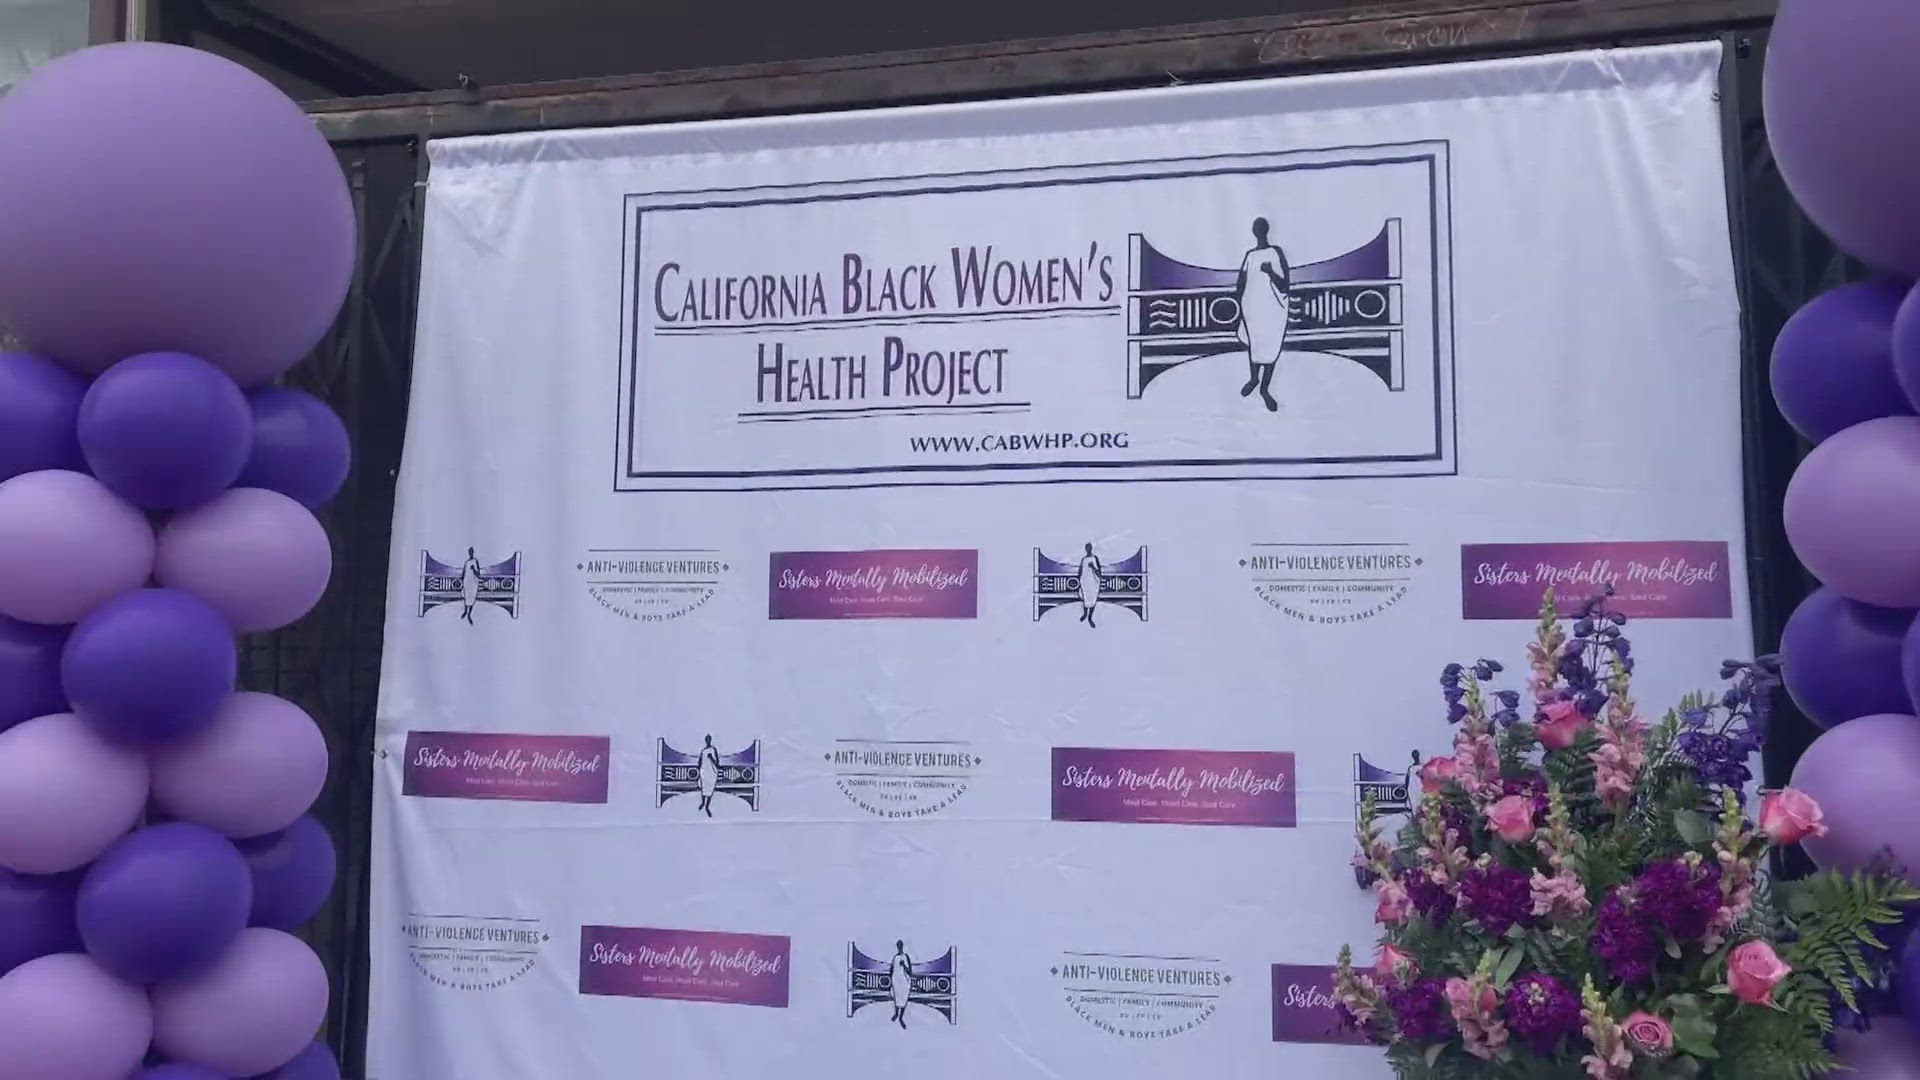 California Black Women's Health Project is a non-profit organization aimed to improve the health of black women in the state from preconception through aging.